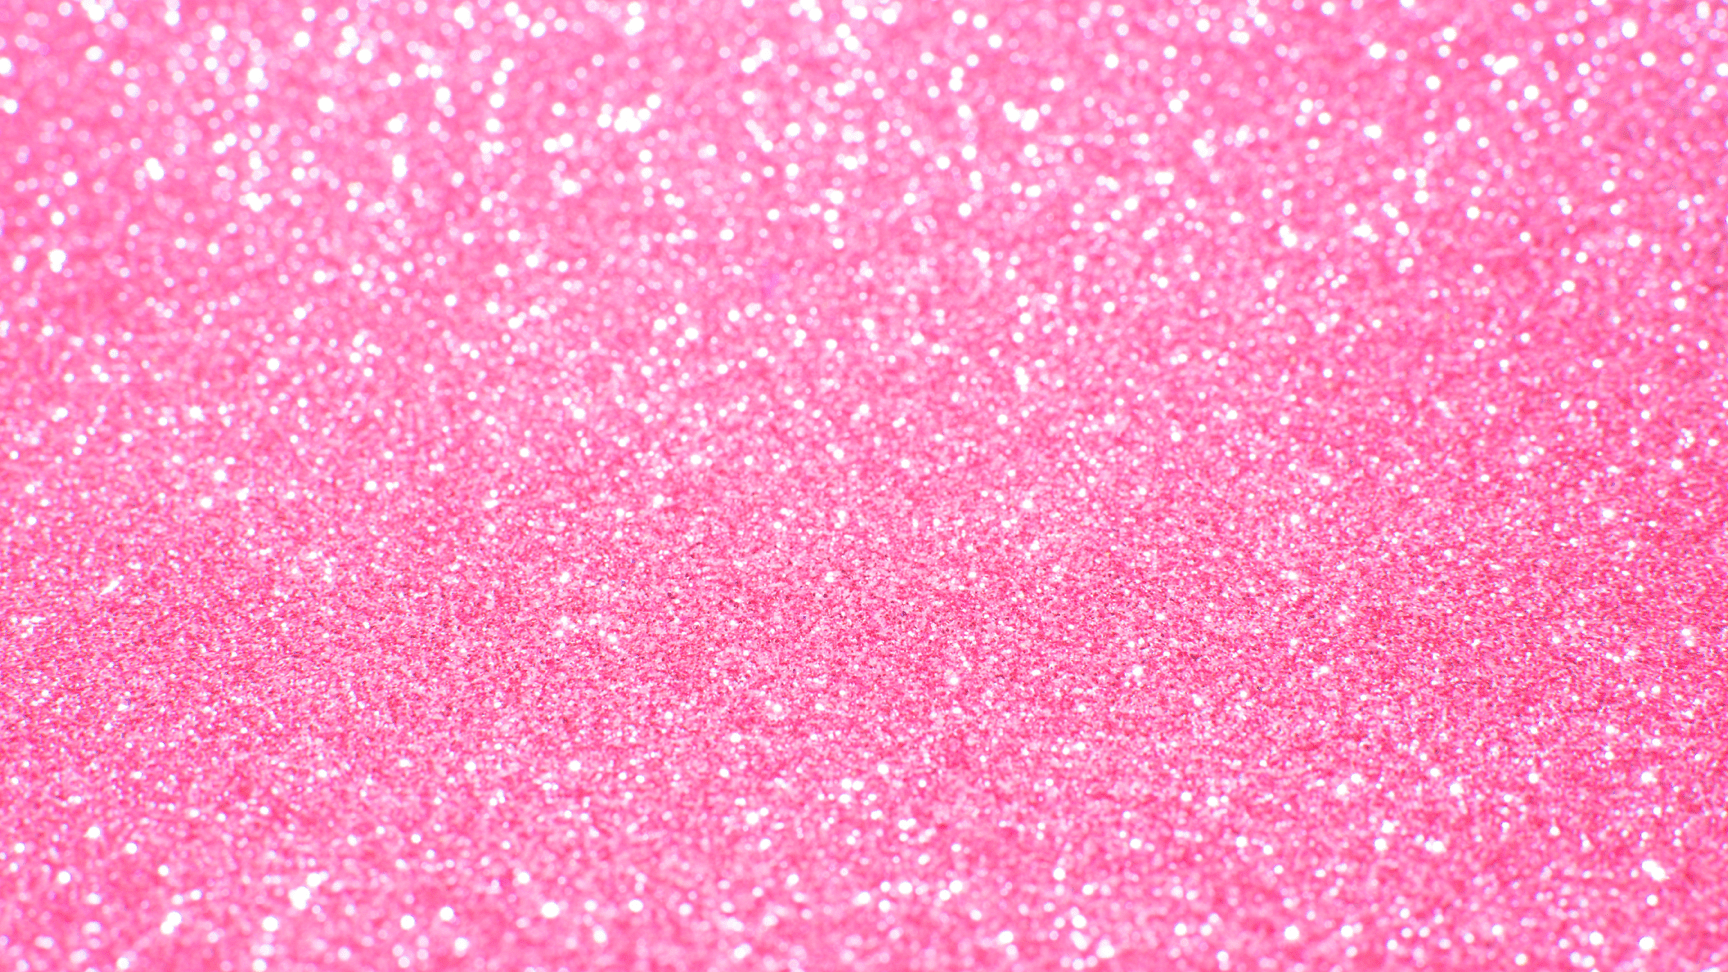 "magical pink sparkles that are sure to add the perfect touch to any project!"